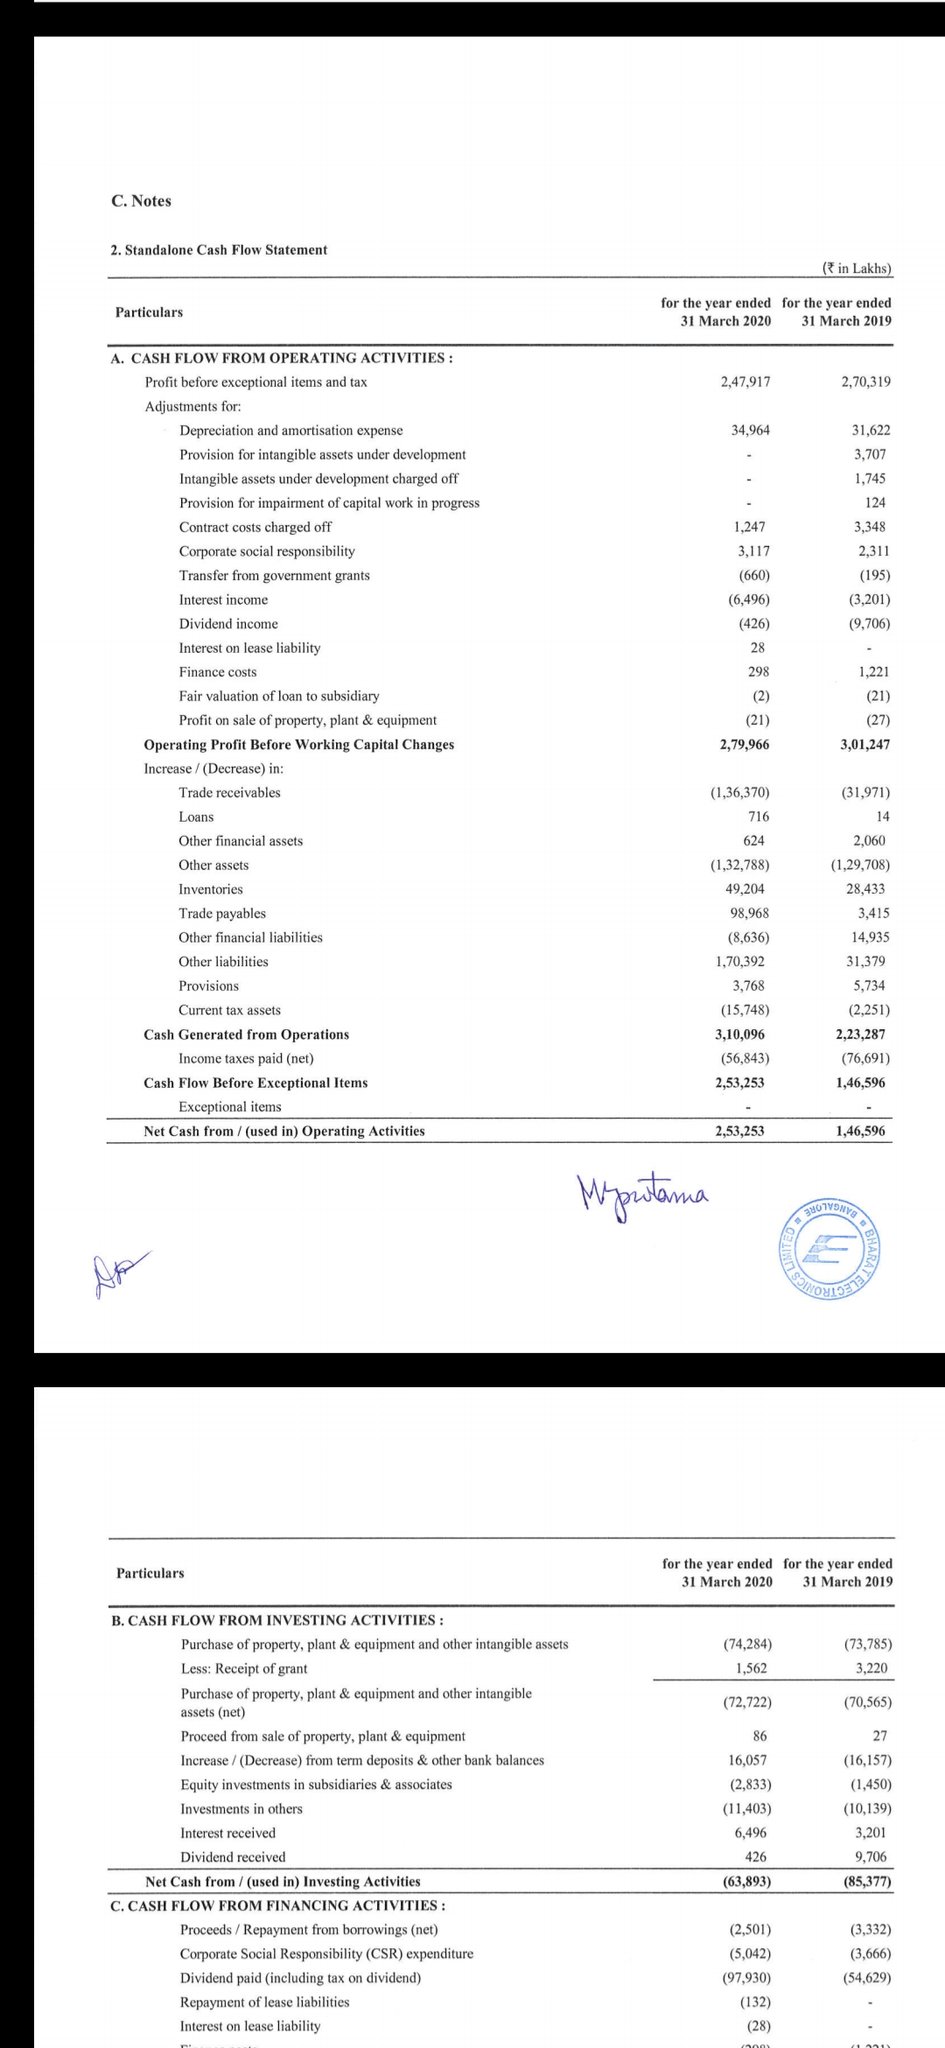 shreenidhi p on twitter fantastic results from another defence company bel bharat electronics ltd stellar q4 solid cash flow operations pat at 1046cr vs 600cr clean balance sheet https t co rqnfehoivz difference between general ledger and trial template excel free